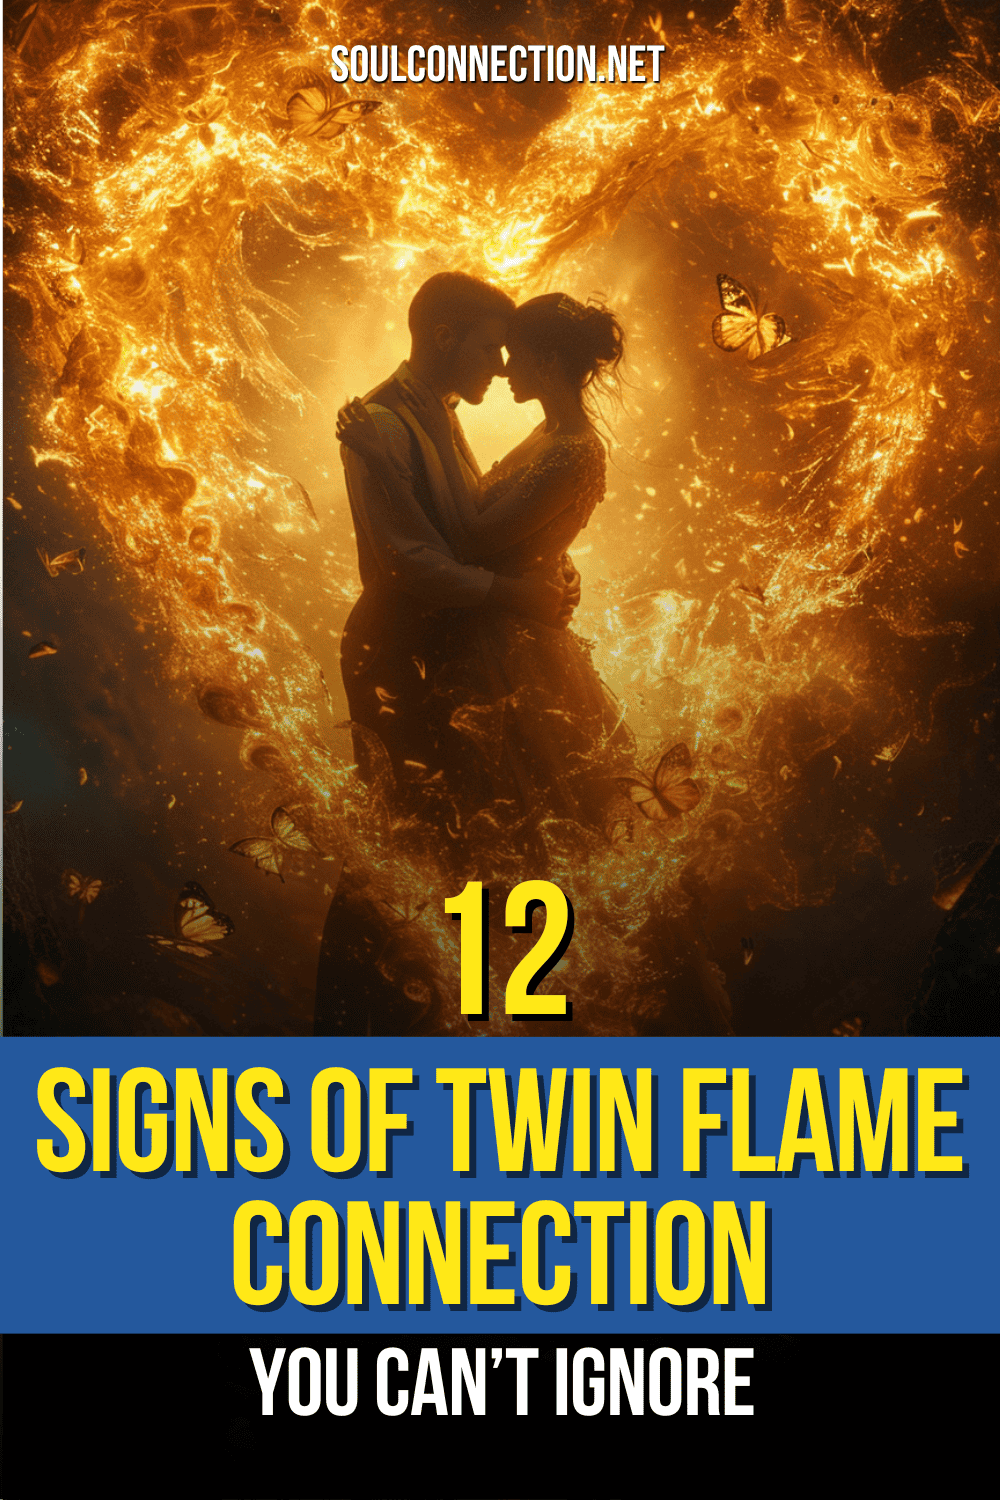 12 Unmistakable Signs of a Twin Flame Connection - SoulConnection.net